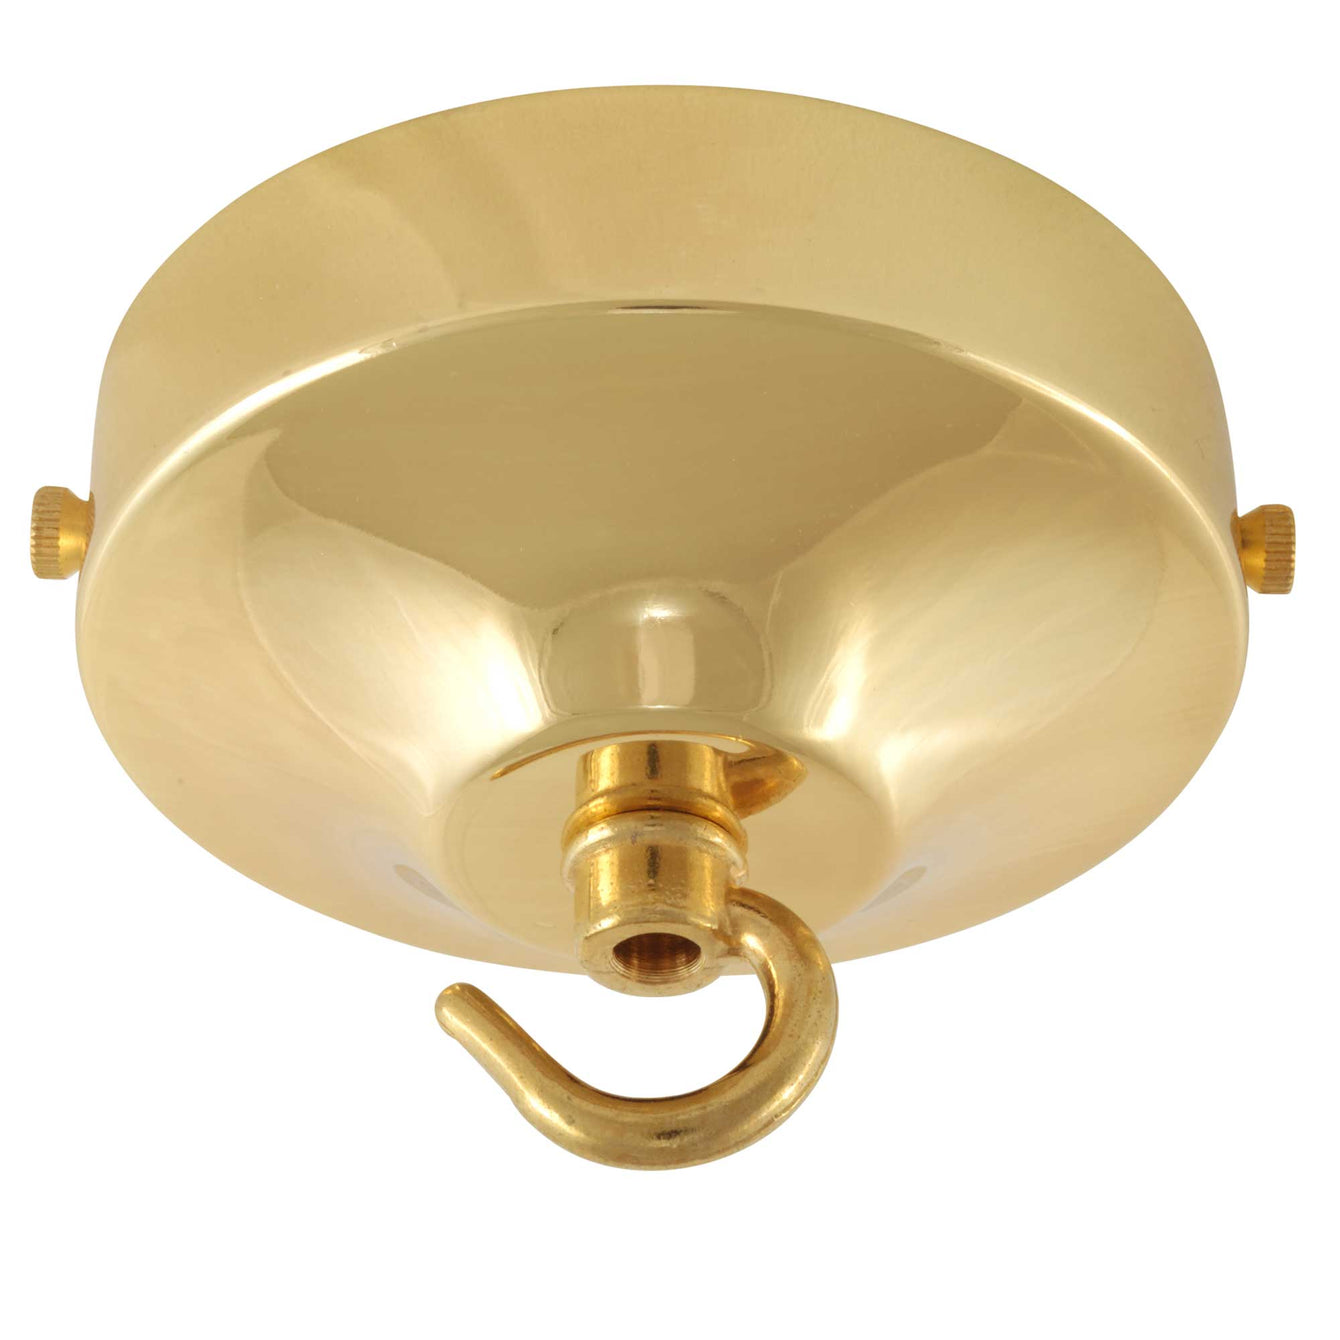 ElekTek 100mm Diameter Convex Ceiling Rose with Strap Bracket and Hook Metallic and Powder Coated Finishes Antique Brass